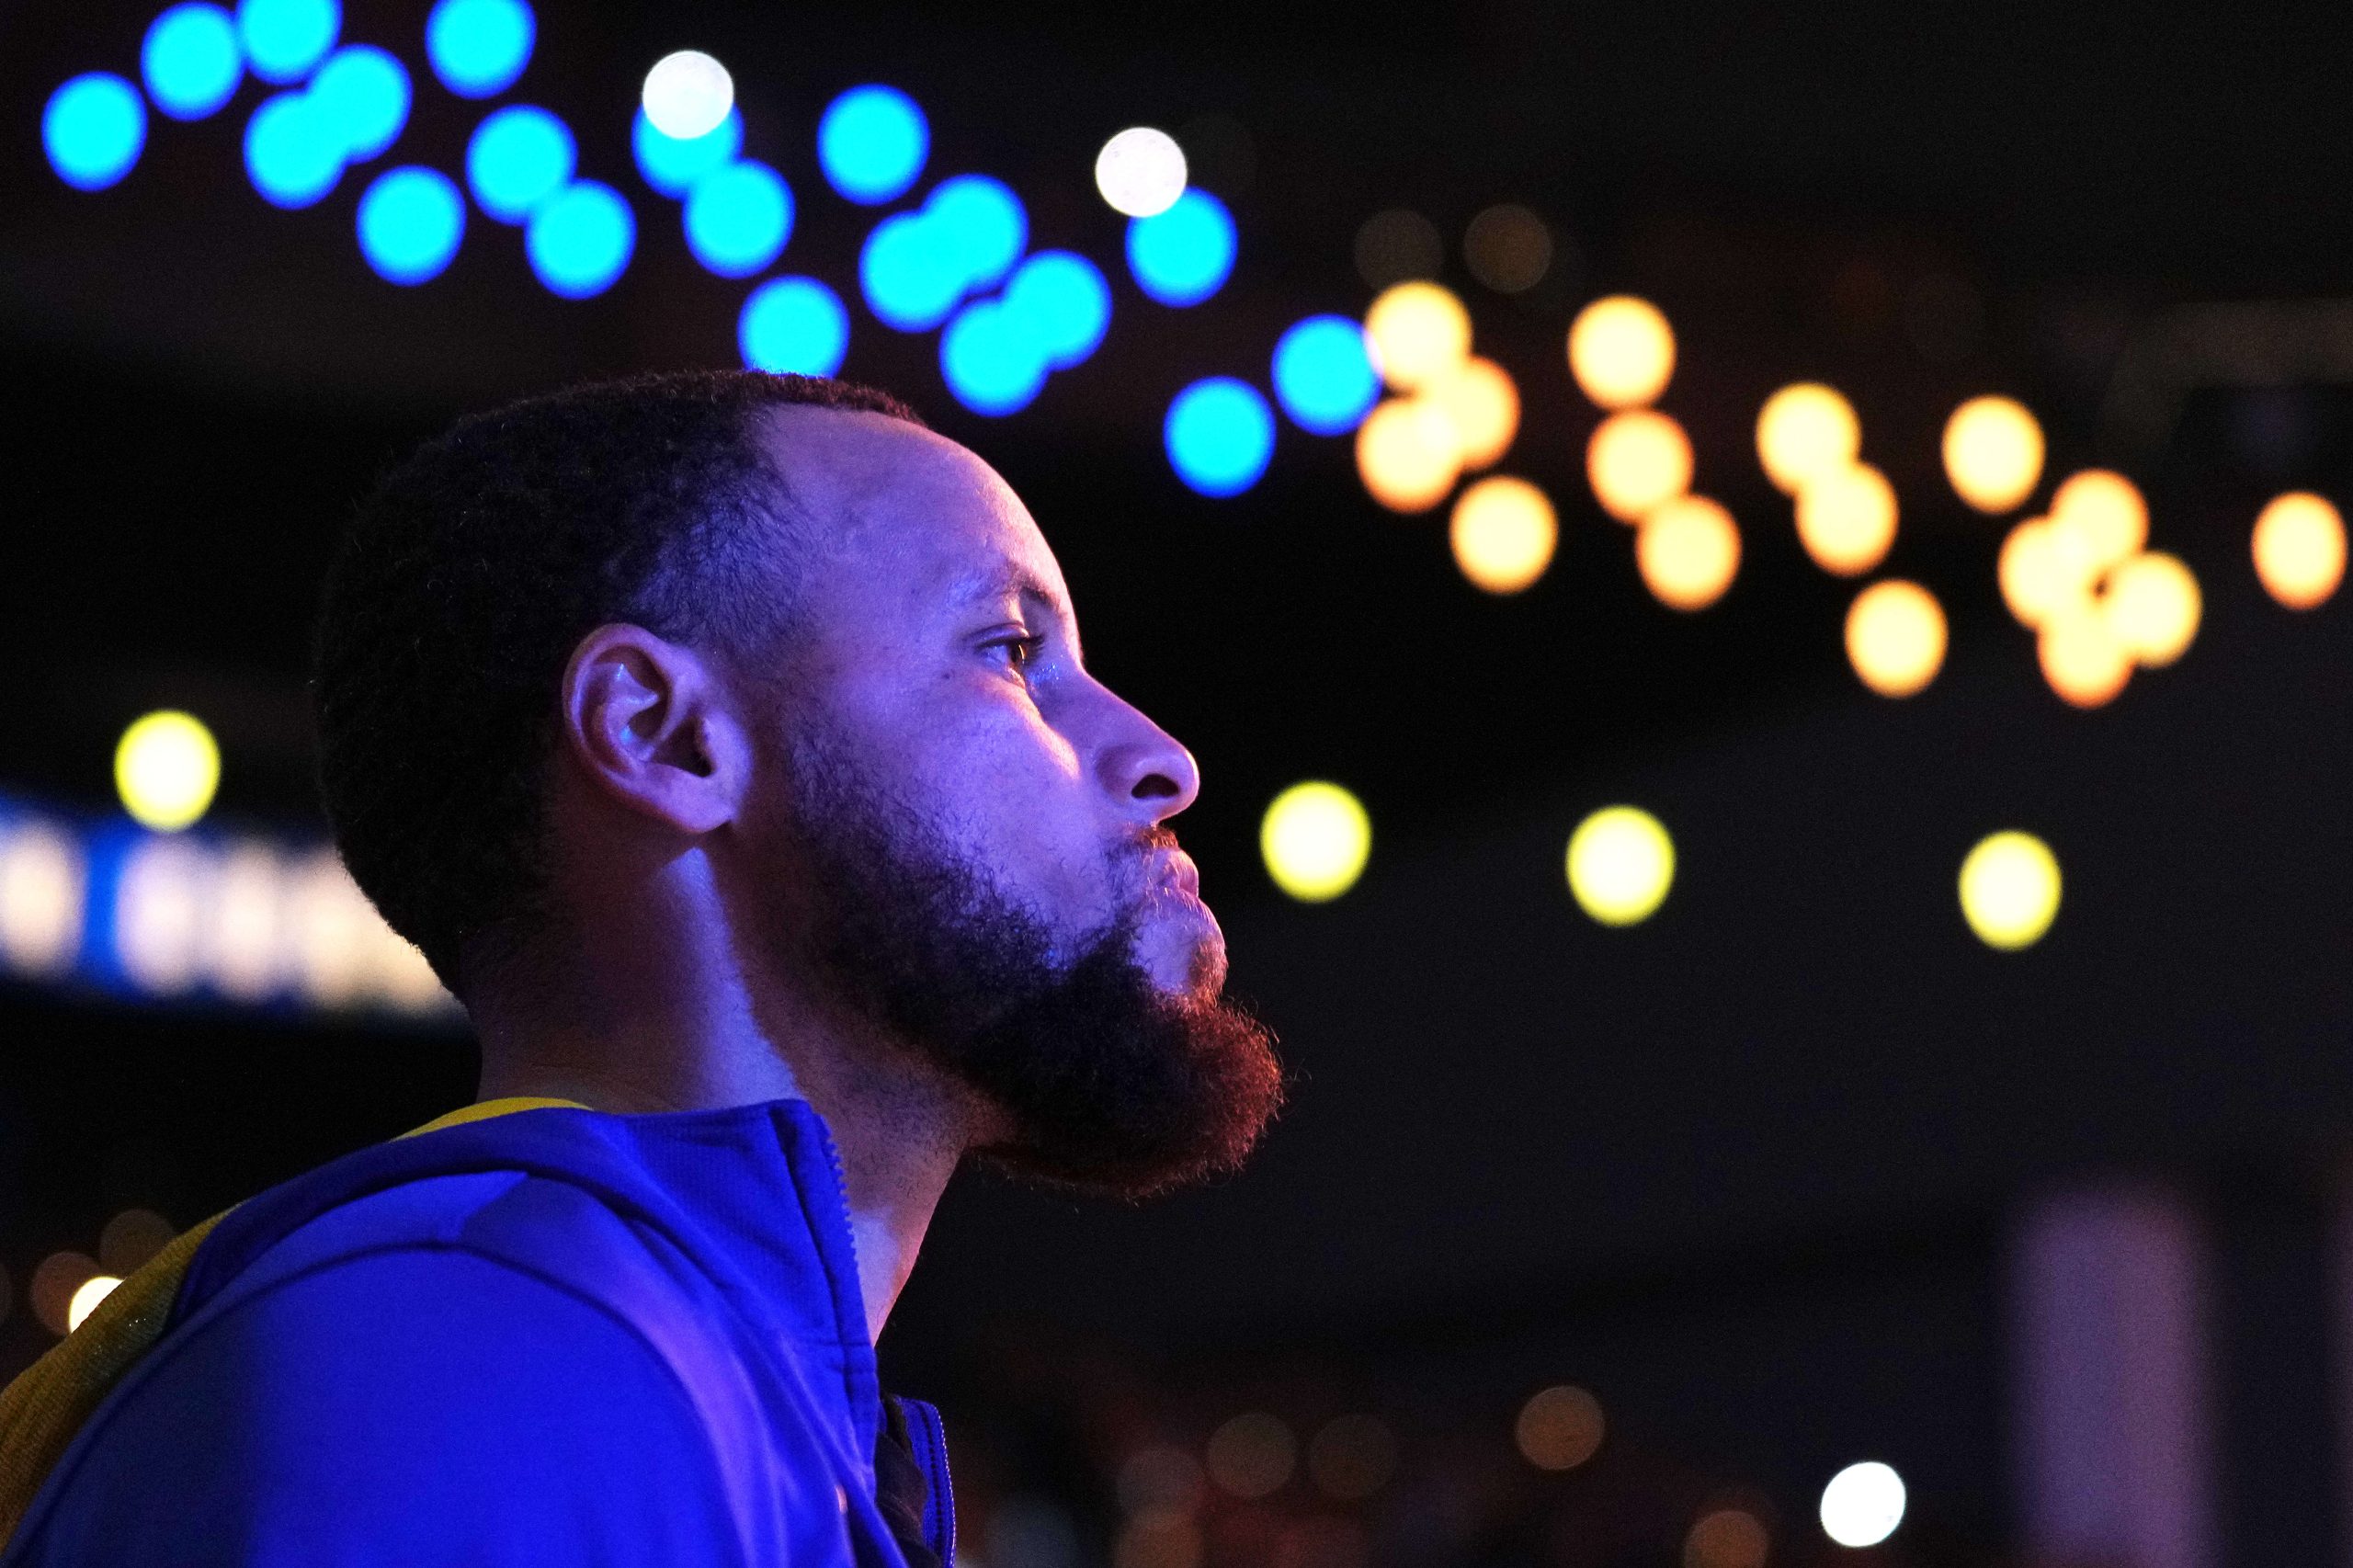 Apr 23, 2023; San Francisco, California, USA; Golden State Warriors guard Stephen Curry (30) stands on the court before game four of the 2023 NBA playoffs against the Sacramento Kings at Chase Center. Mandatory Credit: Darren Yamashita-USA TODAY Sports